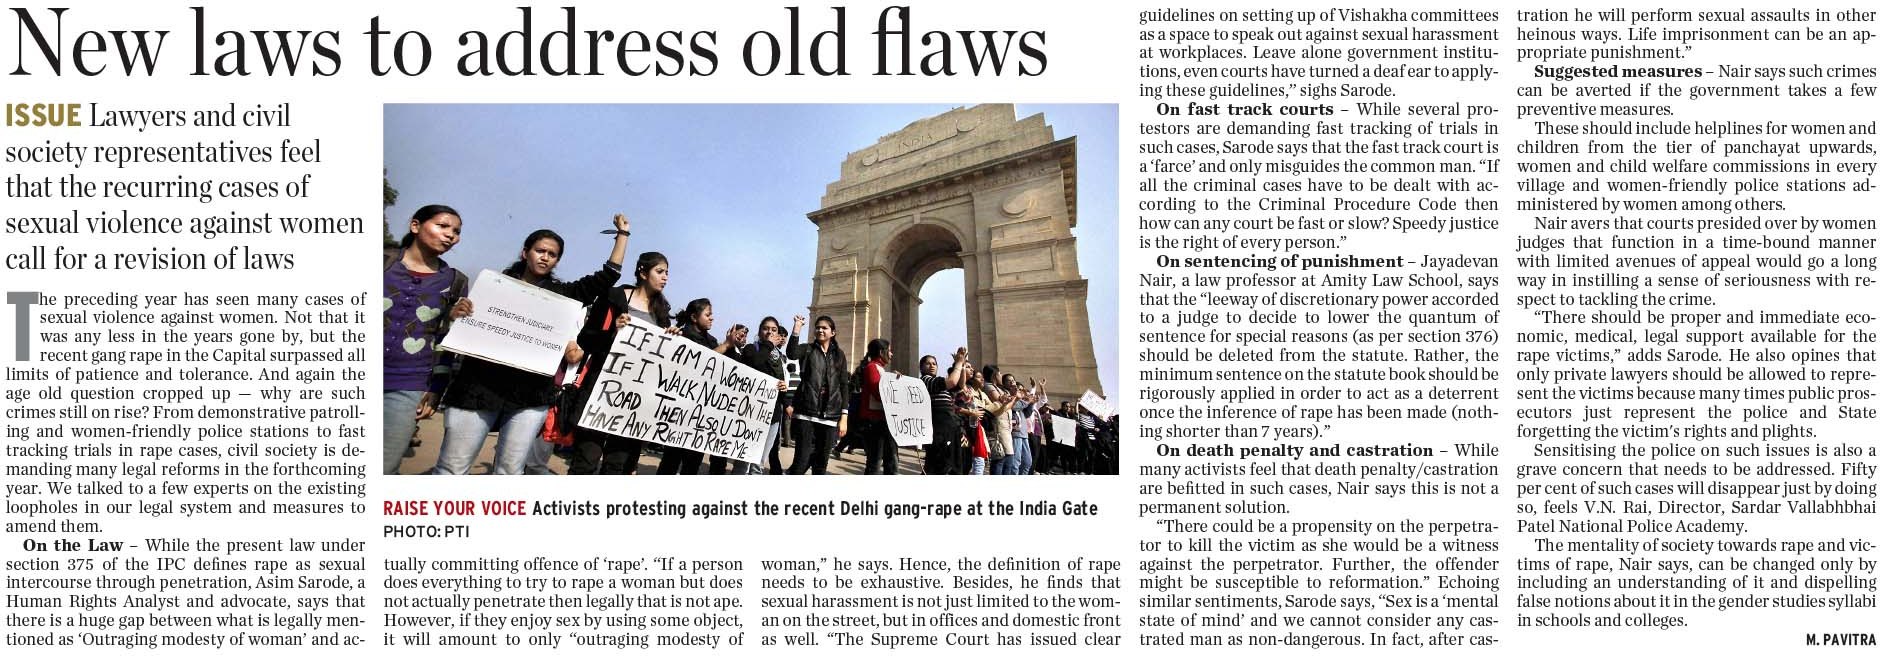 New Laws to address old flaws - quote of Dr. Jayadevan Nair, Professor, Amity Law School